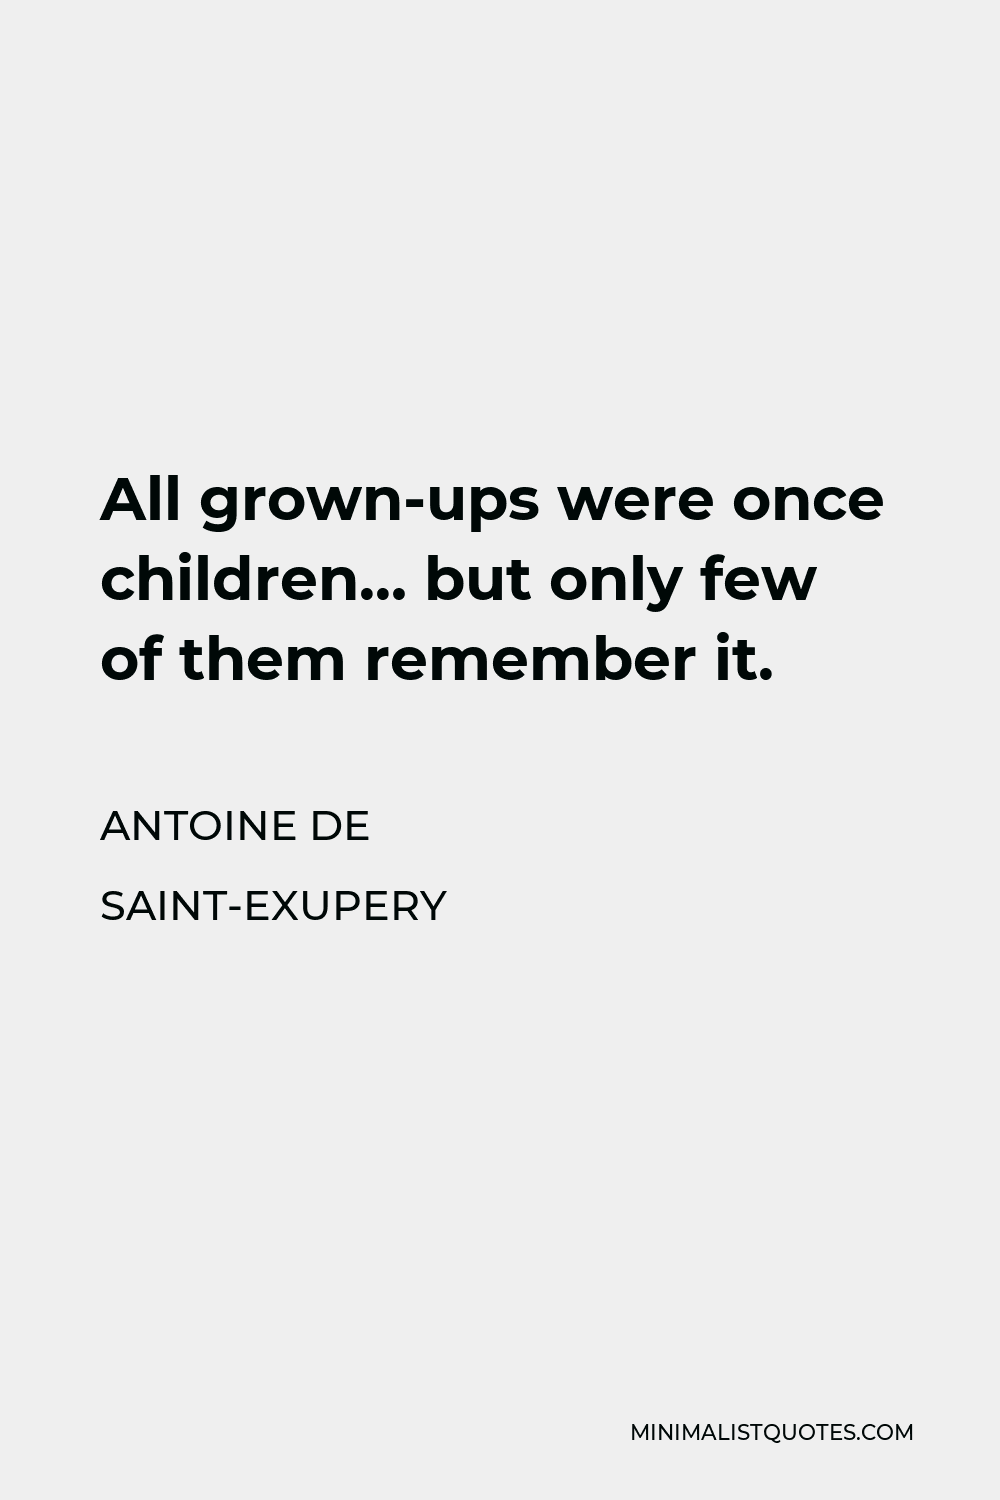 Antoine de Saint-Exupery Quote - All grown-ups were once children but only few of them remember it.